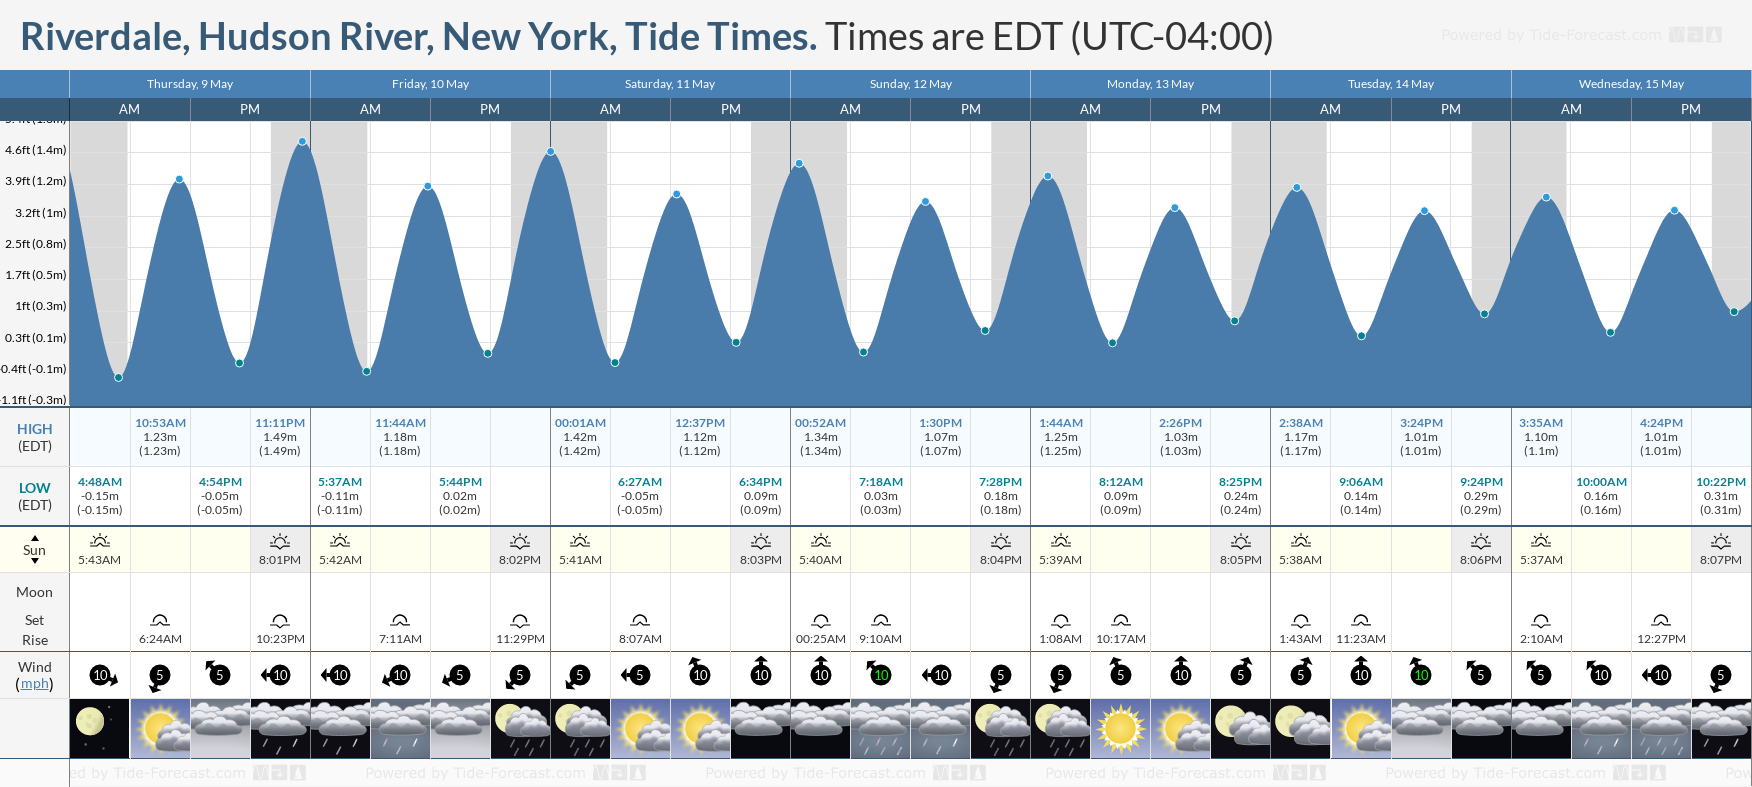 Riverdale, Hudson River, New York Tide Chart including high and low tide tide times for the next 7 days